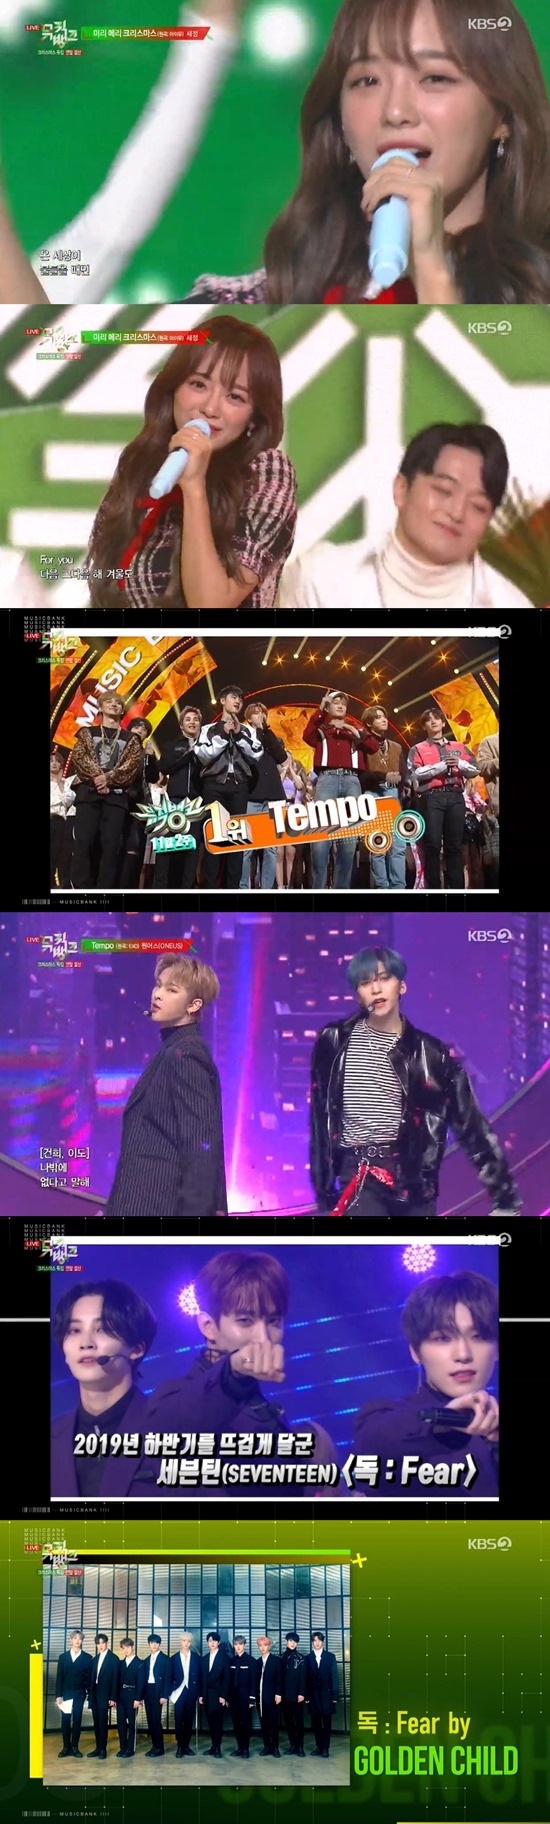 Singers were applauded for their various cover stages and performances.On the 20th KBS 2TV Music Bank, the end of 2019 settlement stage was released.The first rocket punches on the day covered Twices Feel Special: they boast a refreshing charm, and set up a flawless stage until the end.CIX then digested its own color of Alligator of global idol Monstar X.In particular, CIX, which freely introduced Monstar Xs Powerful Dance, showed perfect performance.In the meantime, the cleaning of the old club opened the Merry Christmas of IU, which is considered as a representative Christmas song ahead of Christmas.The cleaning that appeared in costumes reminiscent of Christmas captivated the fans with a refreshing smile.In addition, Eats covered BTSs Poetry for Small Things, which was number one in its seven-week career on Music Bank; they reenacted the stage of BTS in pink suits.In addition, One Earth covered EXOs TEMPO and Gold Child covered Seventeens Dog, and received applause for its unique Powerful Performance.In addition, he received applause by releasing his own stages such as Chica, Snapping, WJSN Iruri, Mamamu HIP, NU EST LOVE ME and Super Junior SUPER Clap.Especially Super Junior, who decorated the ending, called Sori Sori and raised the atmosphere to the fullest.Meanwhile, Music Bank includes ATEEZ, CIX, Stray Kids (Stray Kids), TOMORROW X TOGETHER, Golden Child, Kim Jae-hwan, NUEST, Lovelies, Rocket Punch, Mamamu, Sewage, Super Junior, Astro (ASTRO), Girlfriend, WJSN, One Earth (ONEU) S), Cheongha appeared.Photo = KBS 2TV broadcast screen